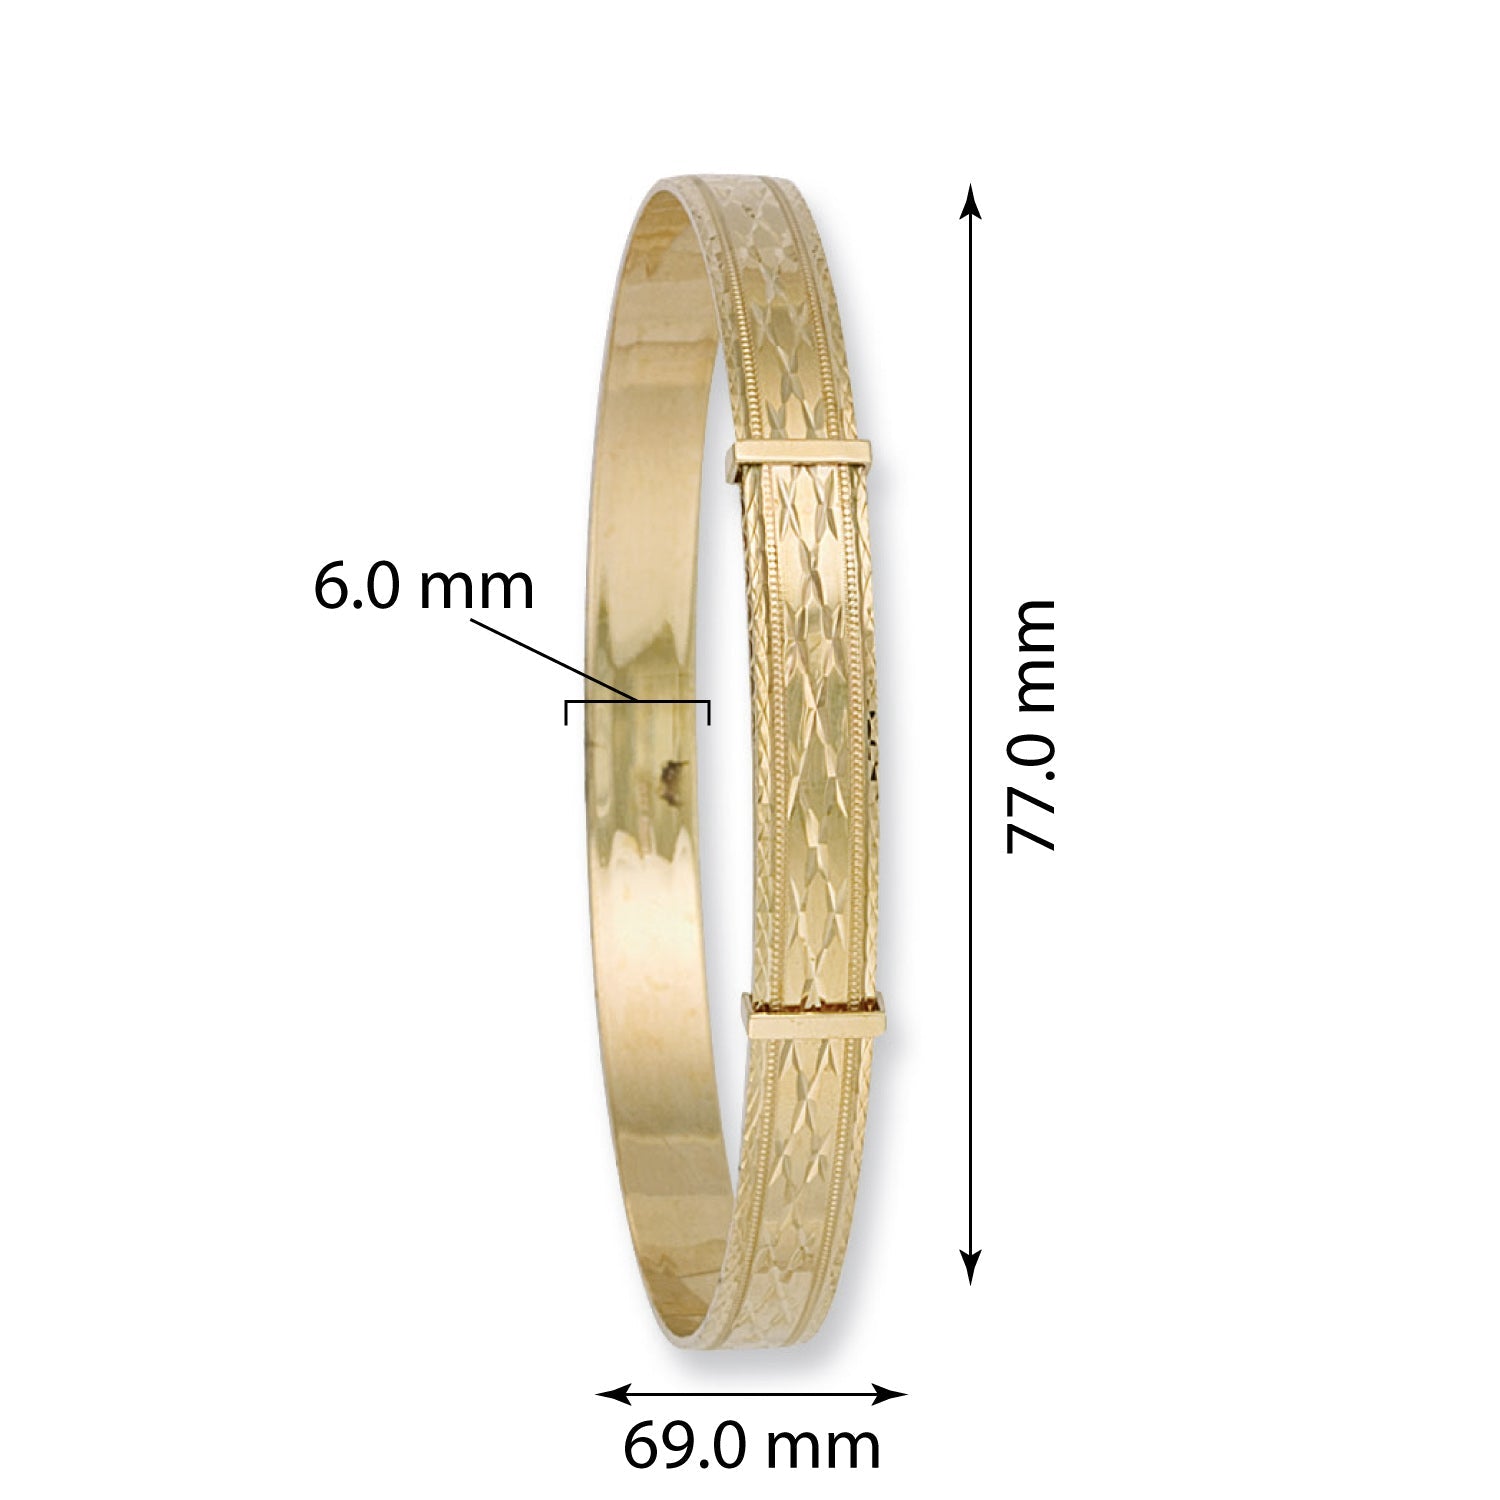 9ct Yellow Gold Expandable Slave Bangle 6mm - FJewellery